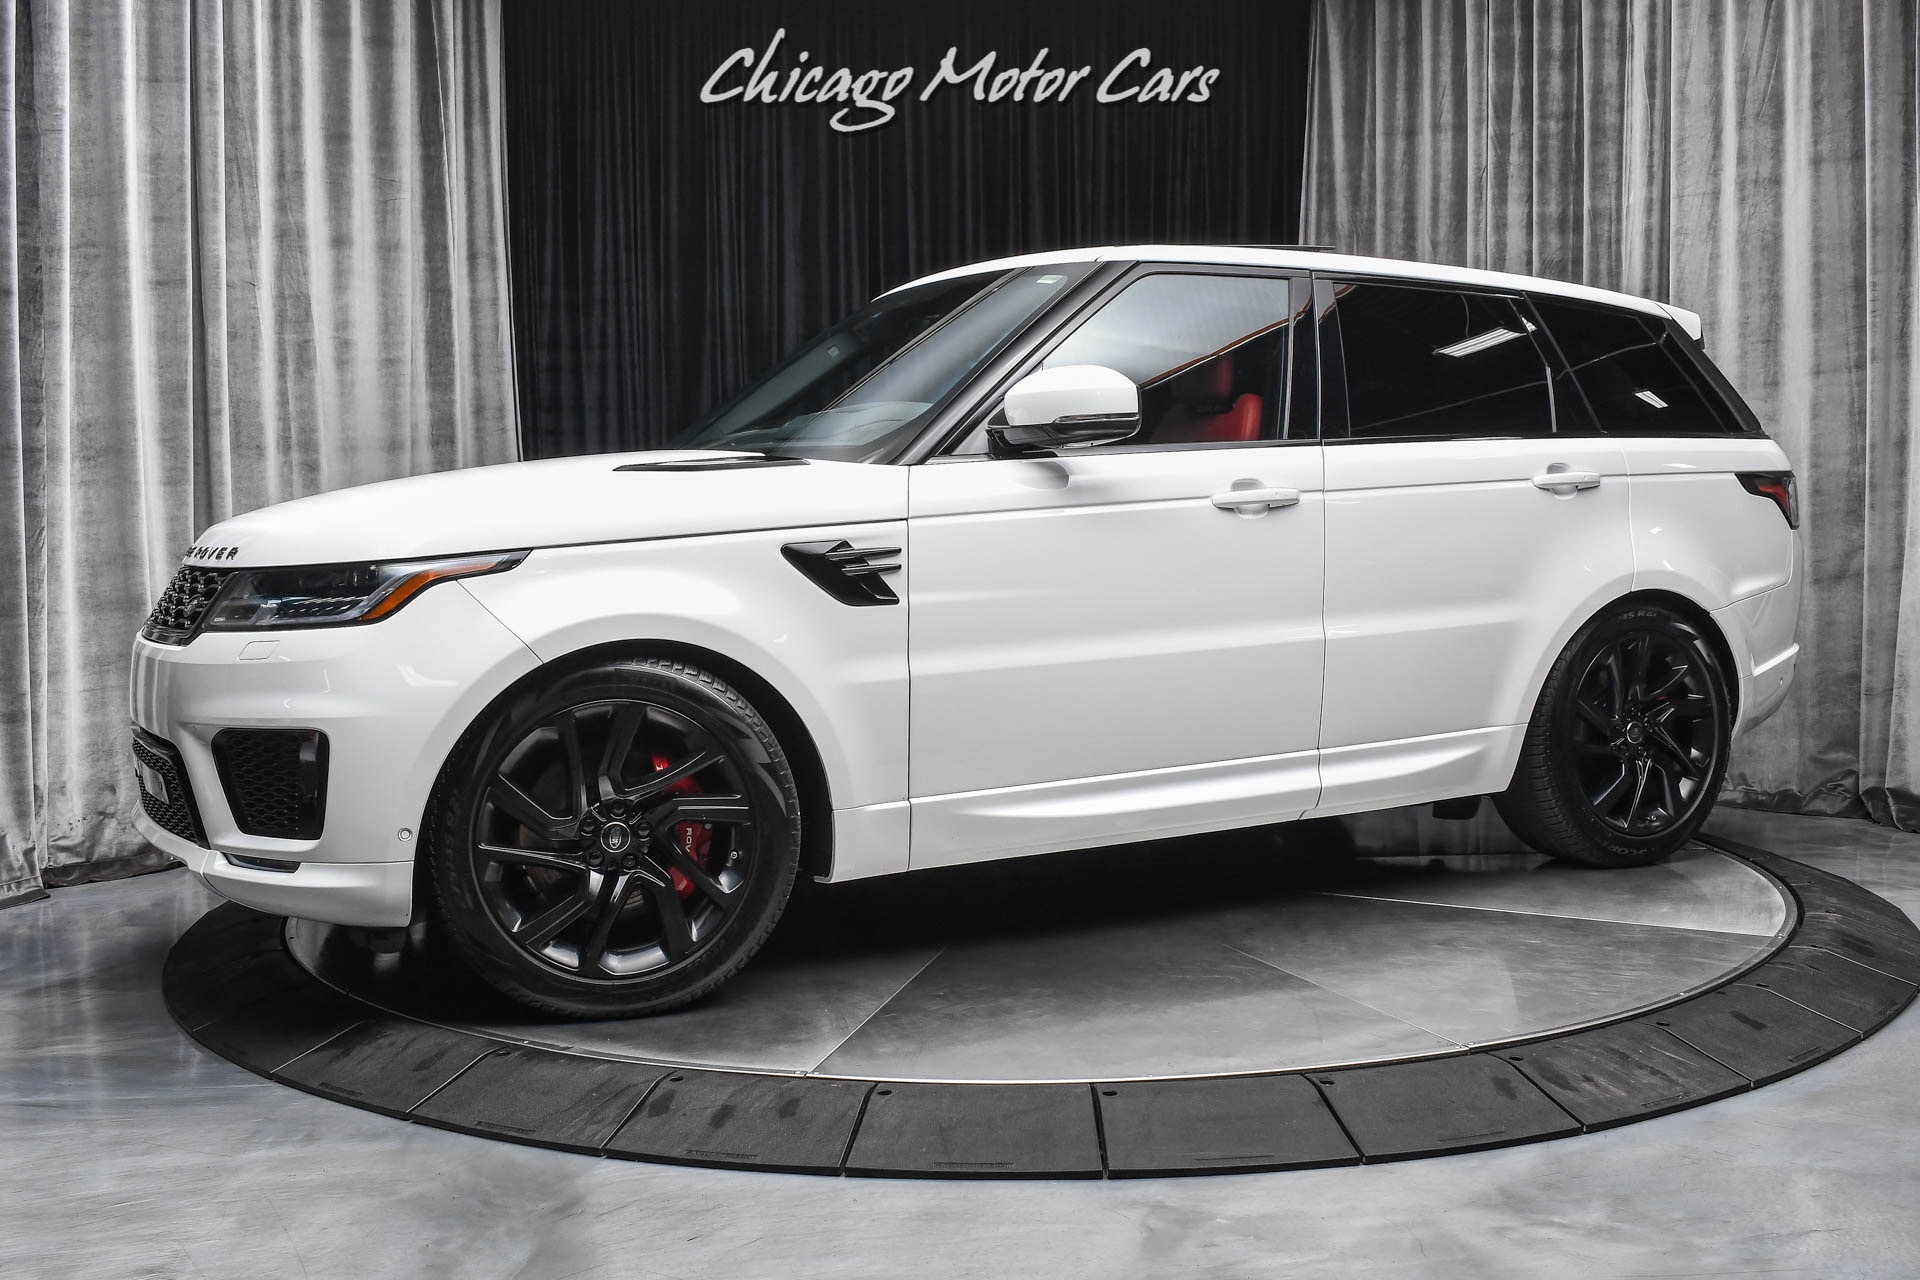 Used-2020-Land-Rover-Range-Rover-Sport-P525-HSE-Dynamic-Pearl-White-LOADED-Red-Interior-HOT